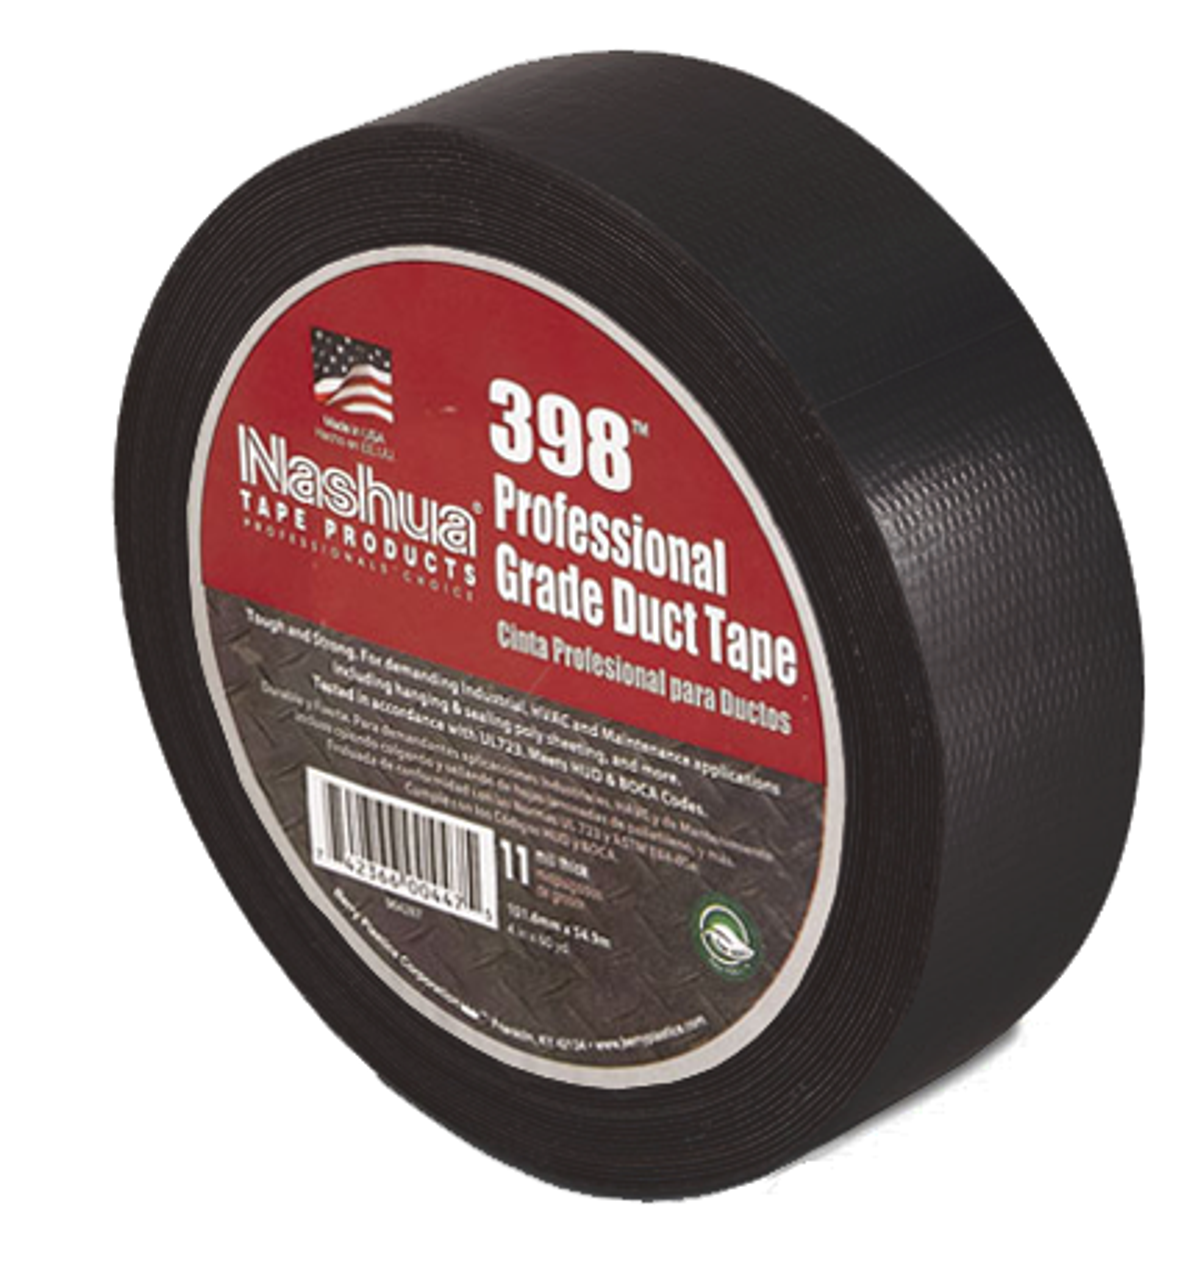 Black Fabric Tape 2Inch Black Duct Tape Heavy Ducty Repair Cloth Duct Pipe  Tape